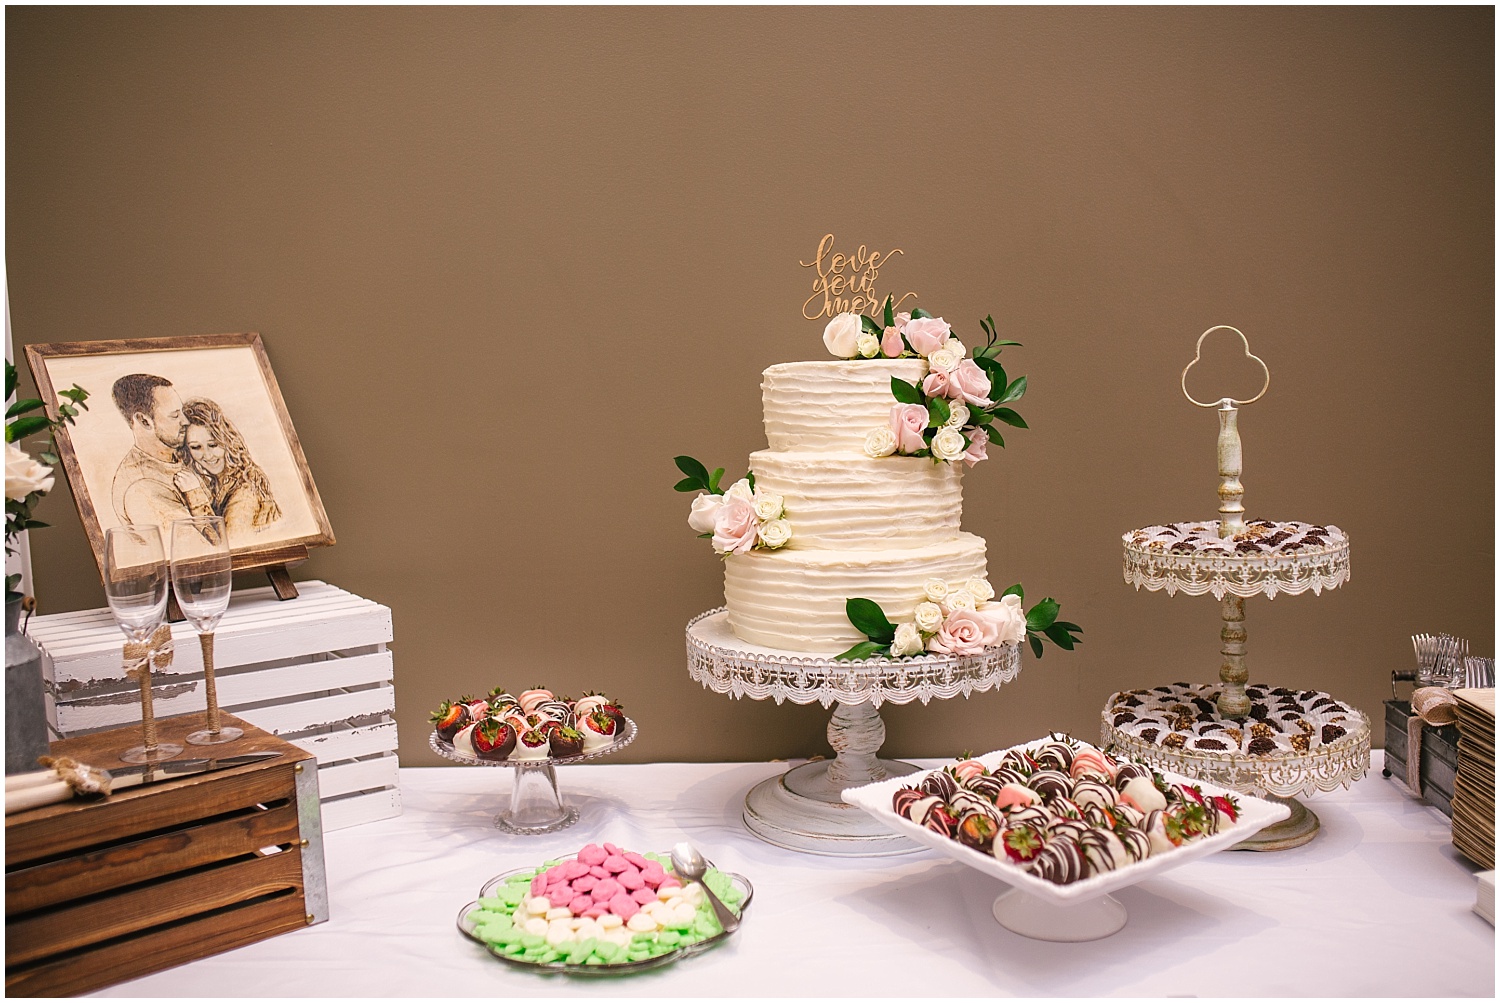 Wedding cake and chocolate candies at dessert table for Cordera wedding in Colorado Springs